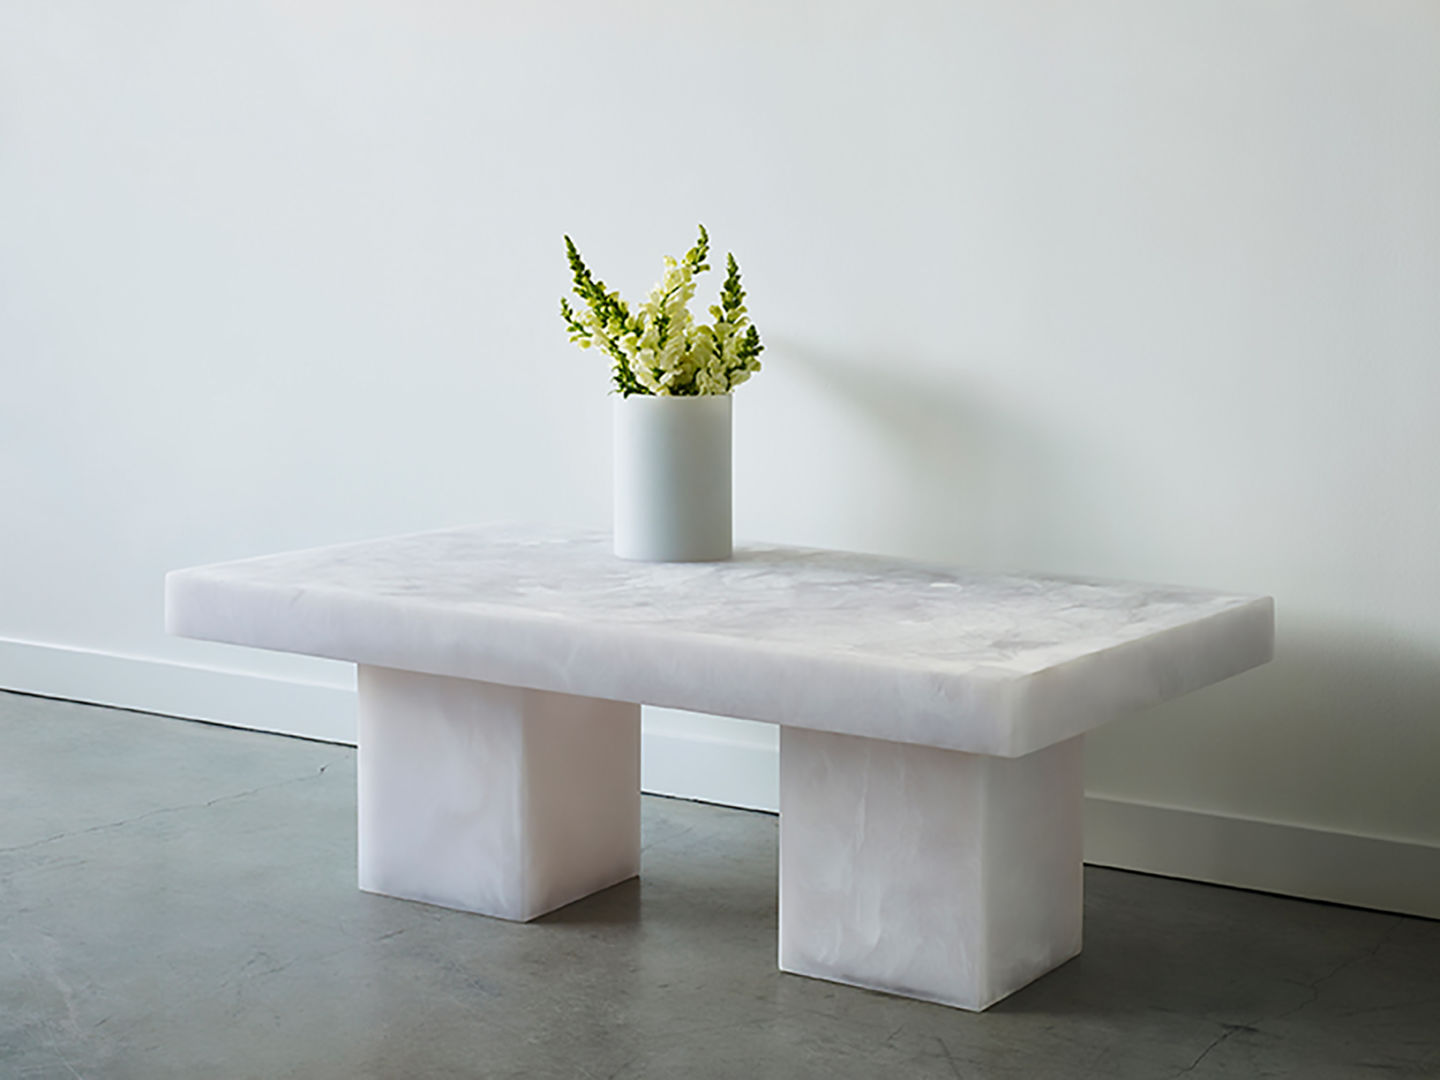 Studio Sturdy Furniture Lions Coffee table white marble